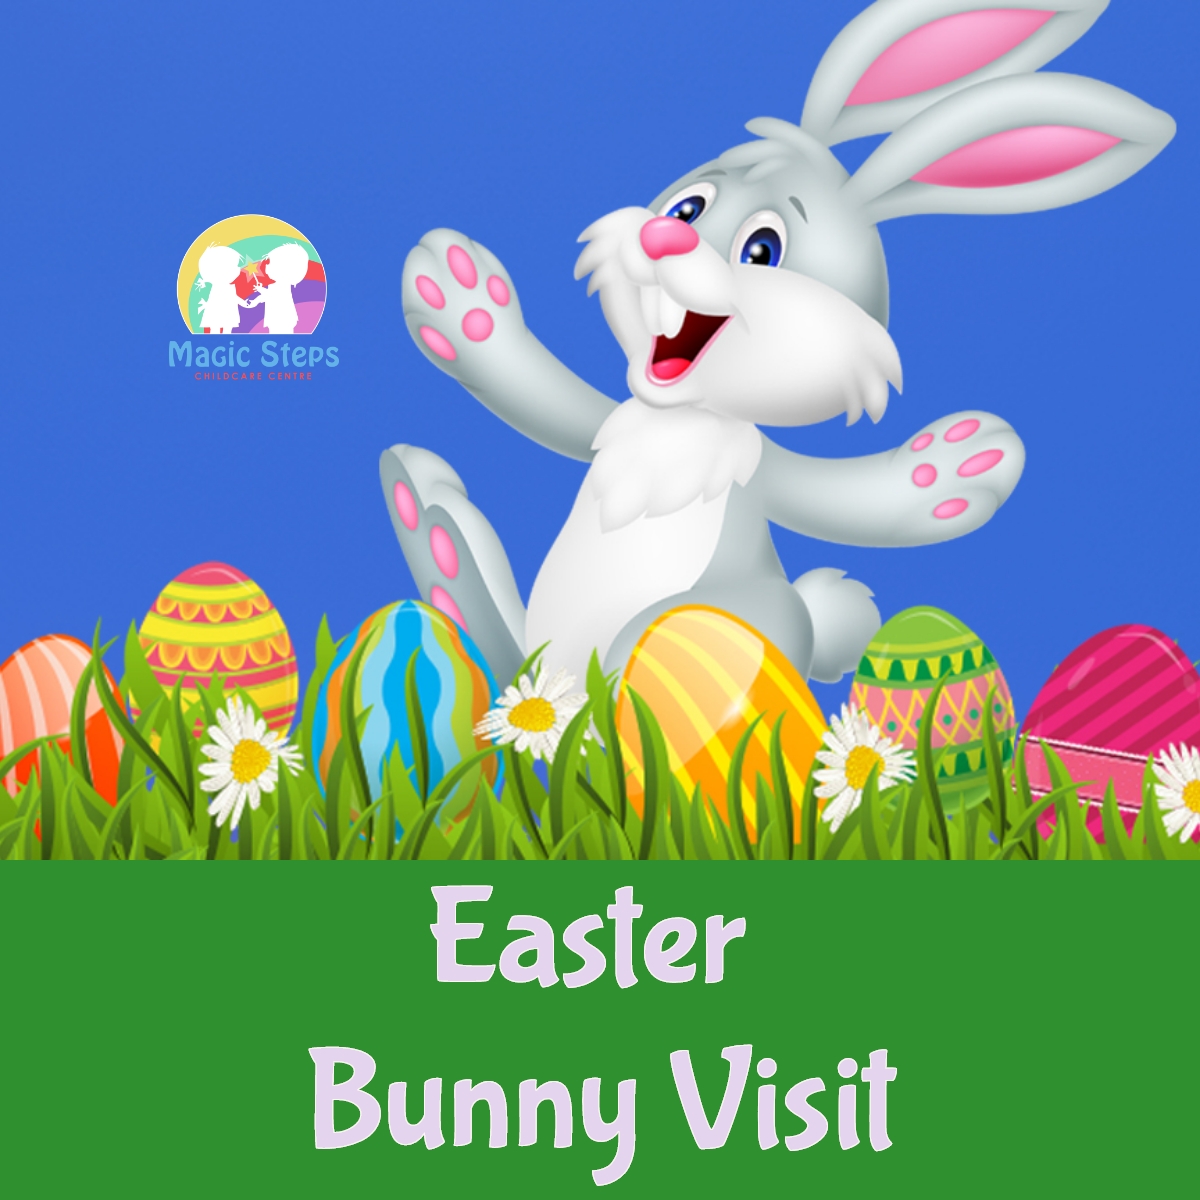 Easter Bunny Visit- Friday 26th March